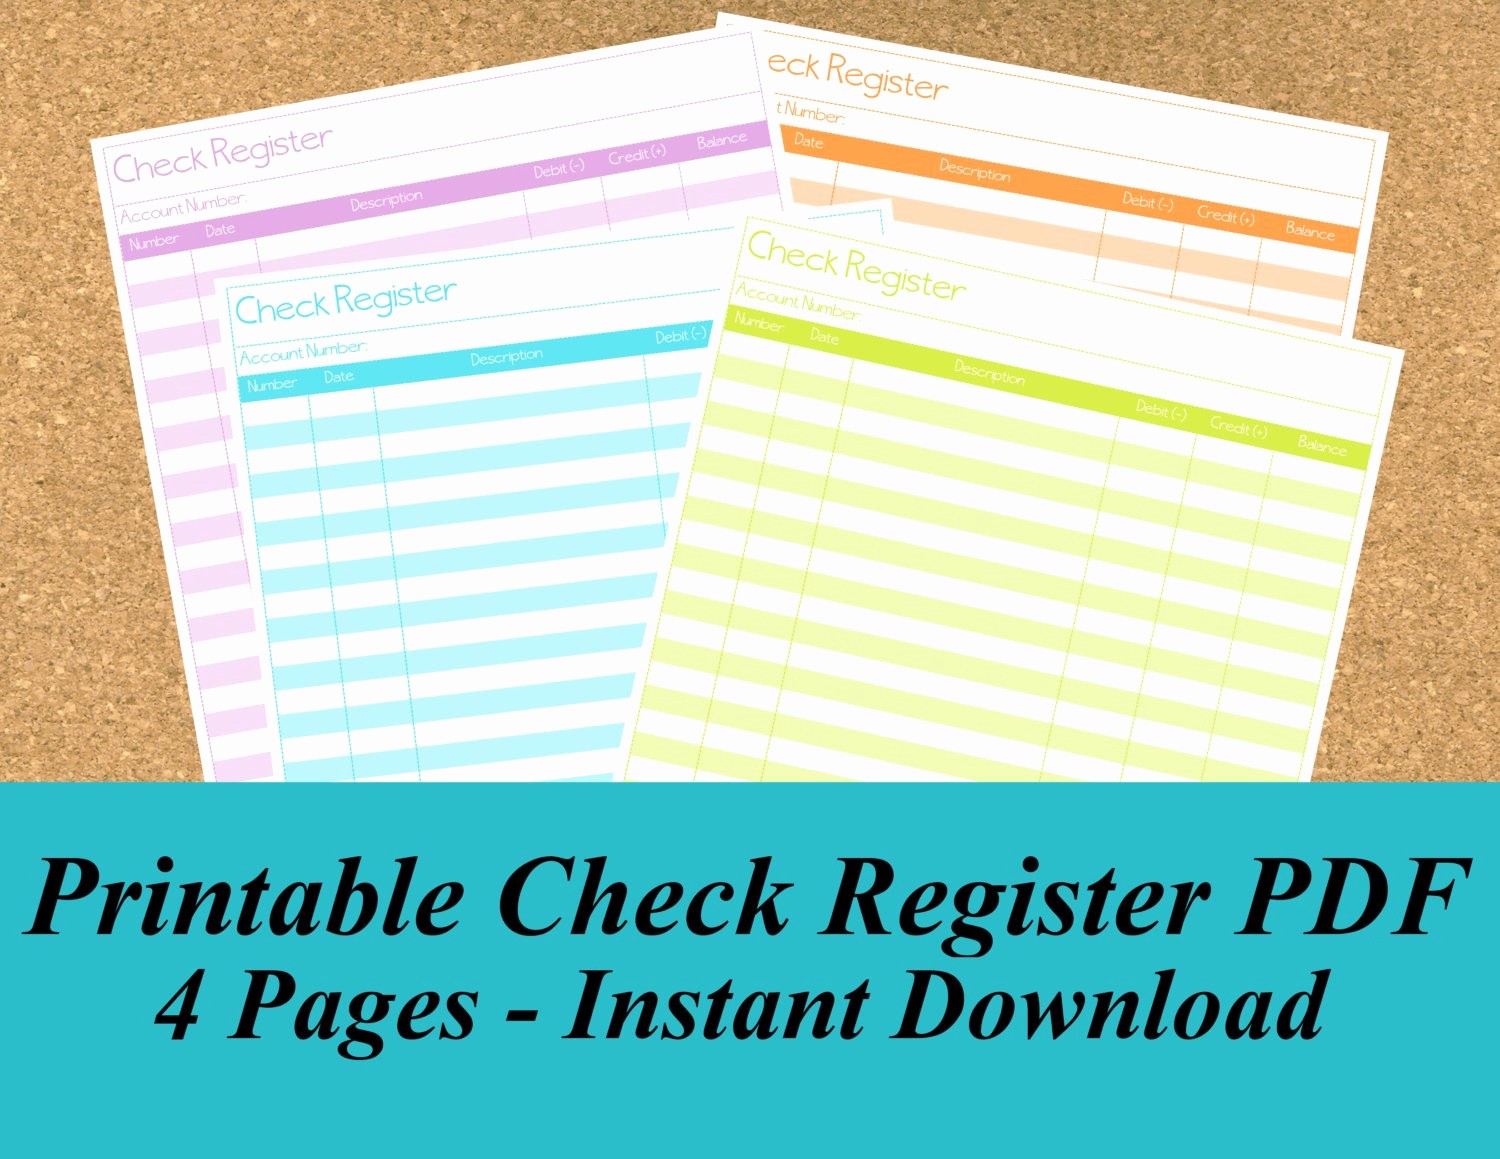 Printable Check Register Full Page Best Of Instant Download Printable Check Register by